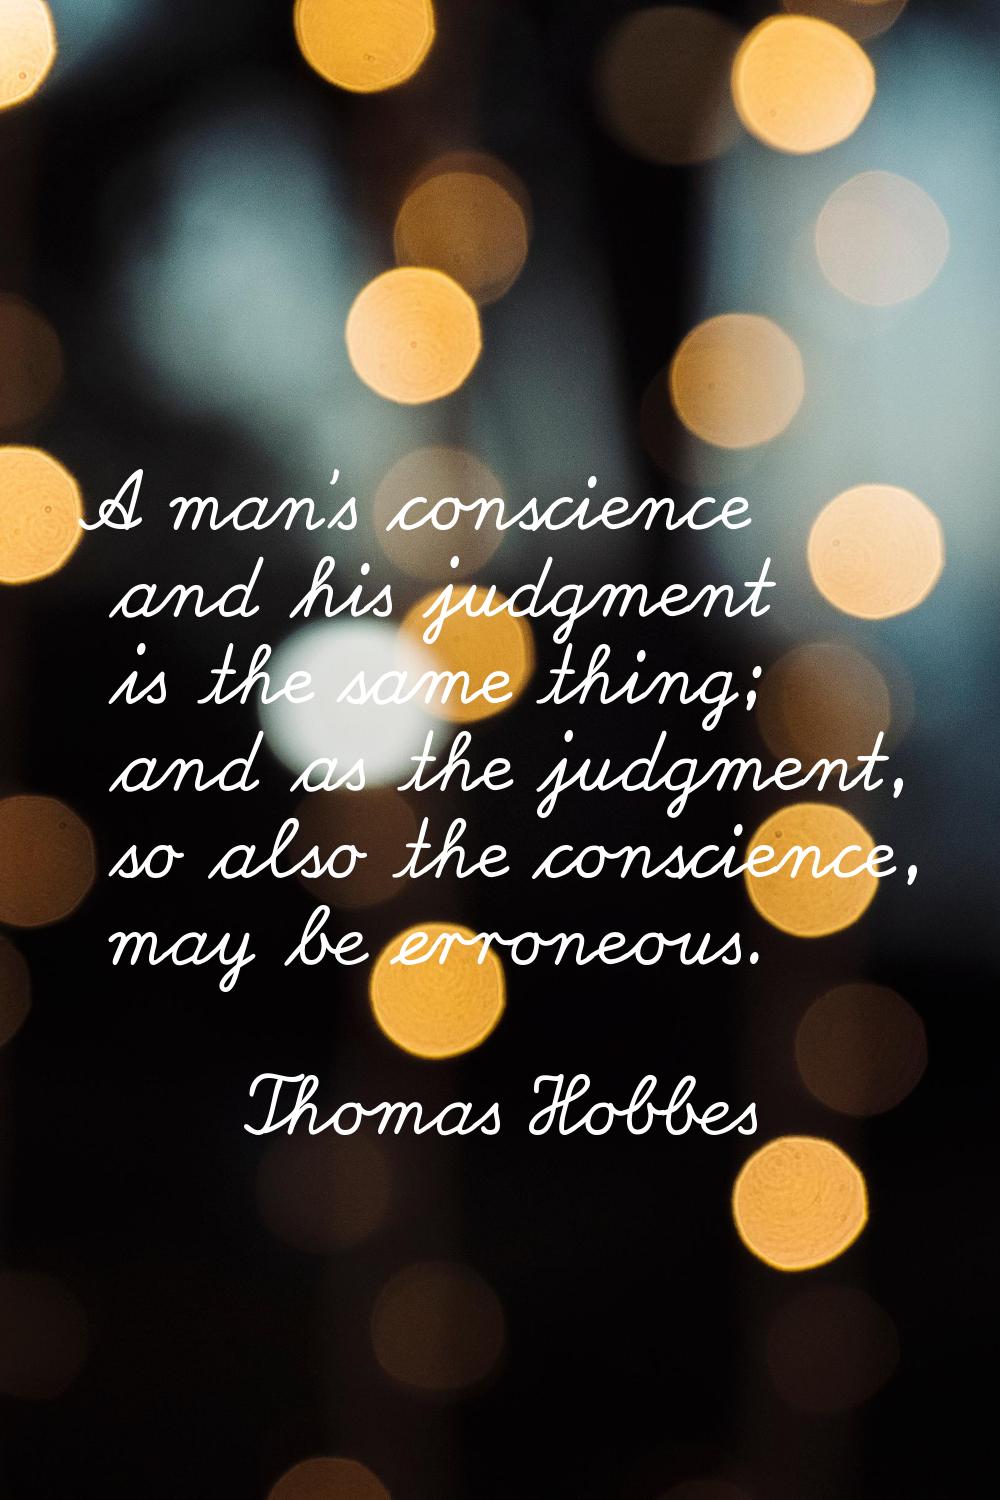 A man's conscience and his judgment is the same thing; and as the judgment, so also the conscience,